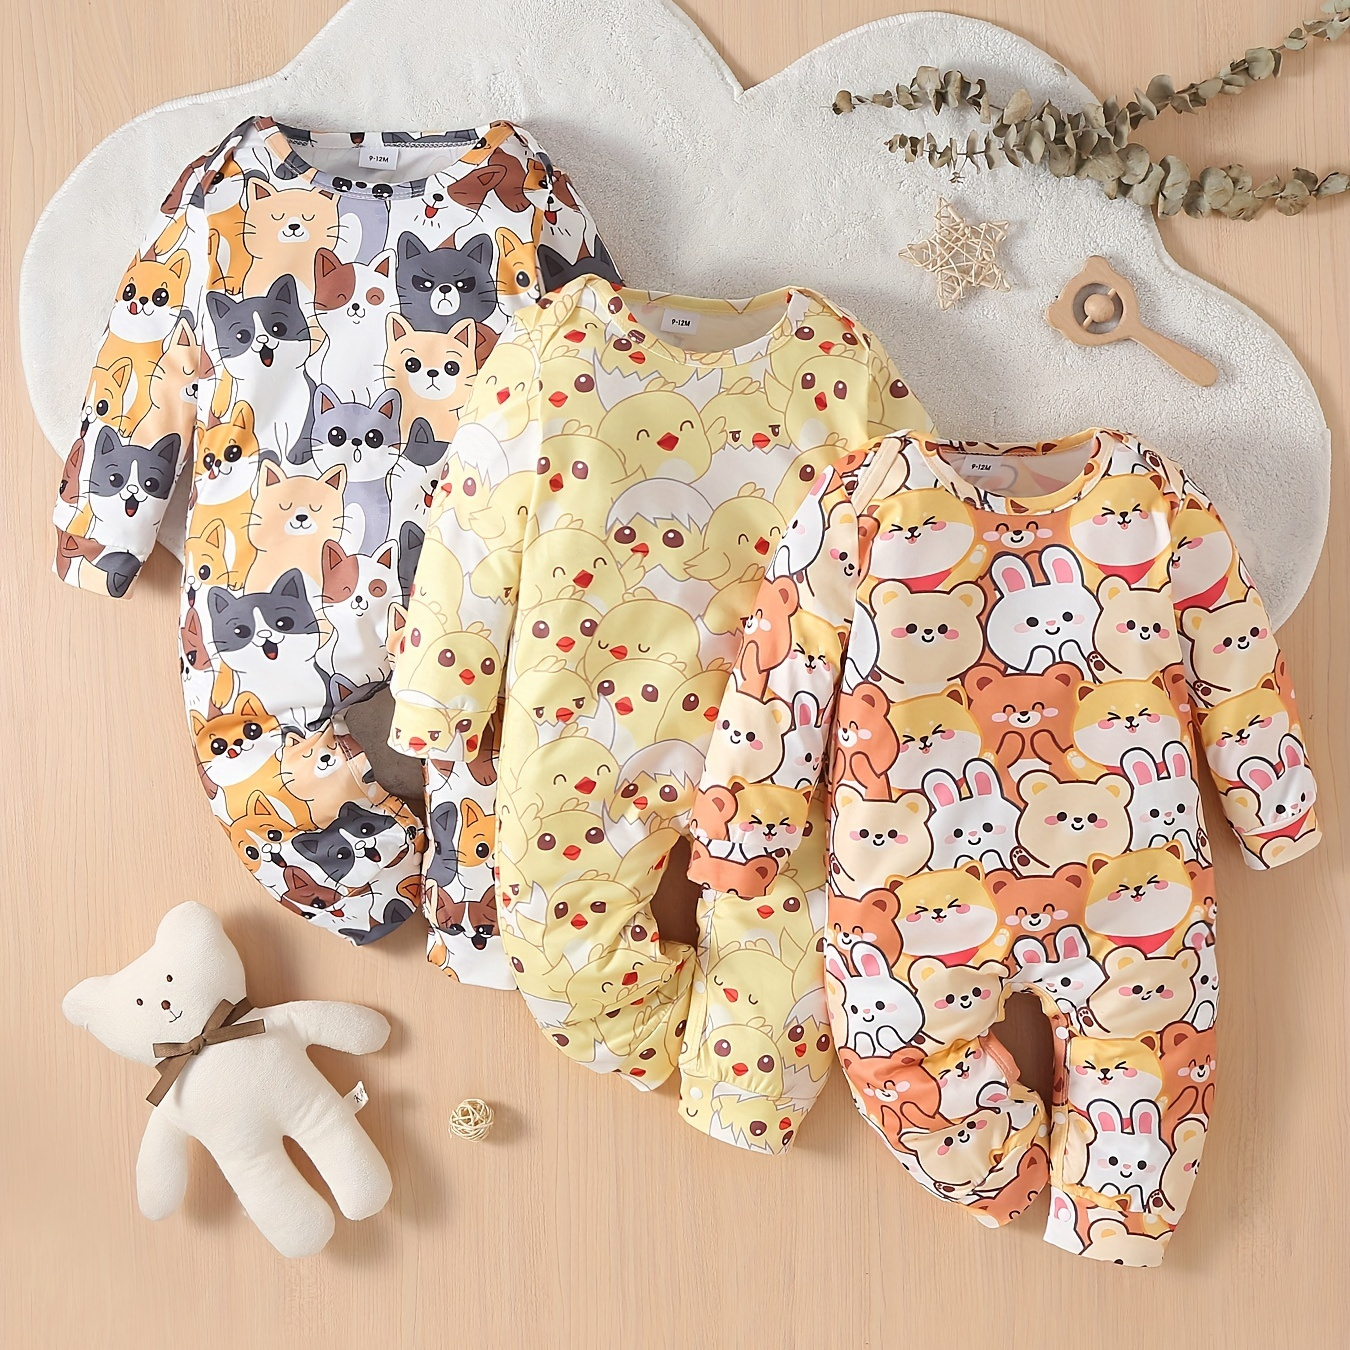 

Baby Girls & Boys Super Cute Cartoon Animal Series Allover Print Jumpsuit, Infant Newborn Crew Neck Long-sleeved Romper, Layette Clothes